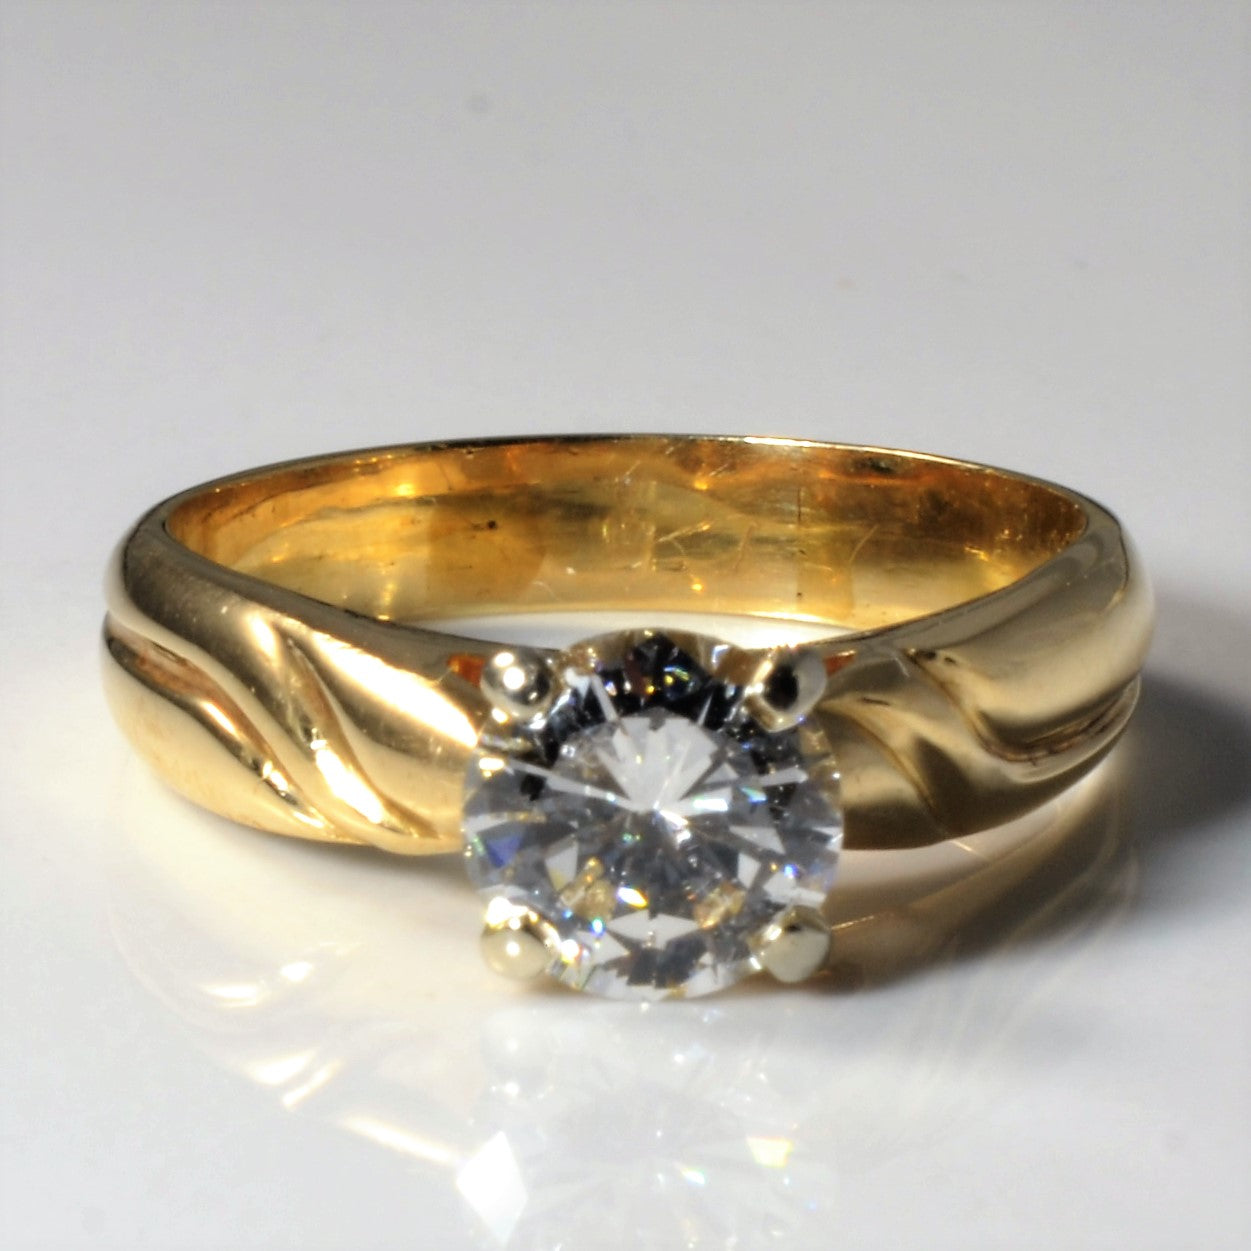 Yellow Gold Solitaire Diamond Engagement Ring | 1.26ct | SZ 8.25 |